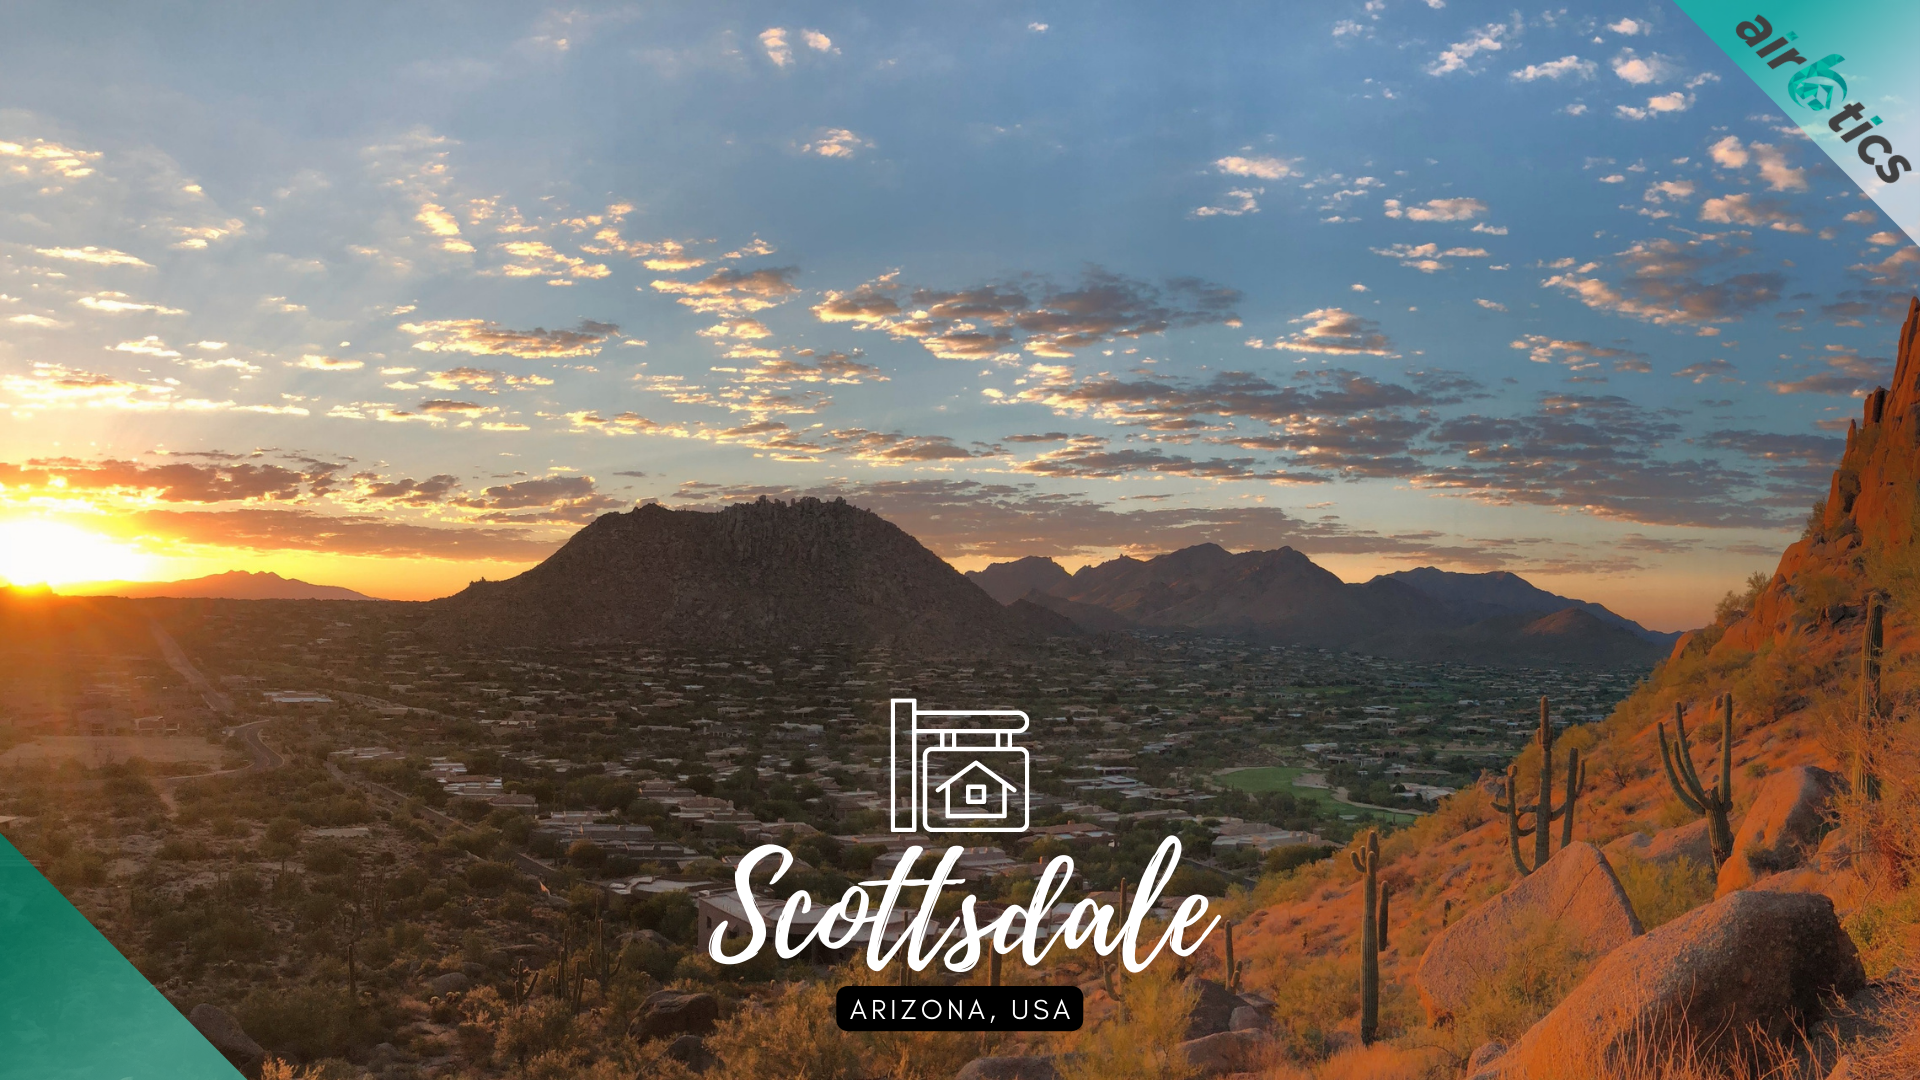 airbnb property investment Scottsdale